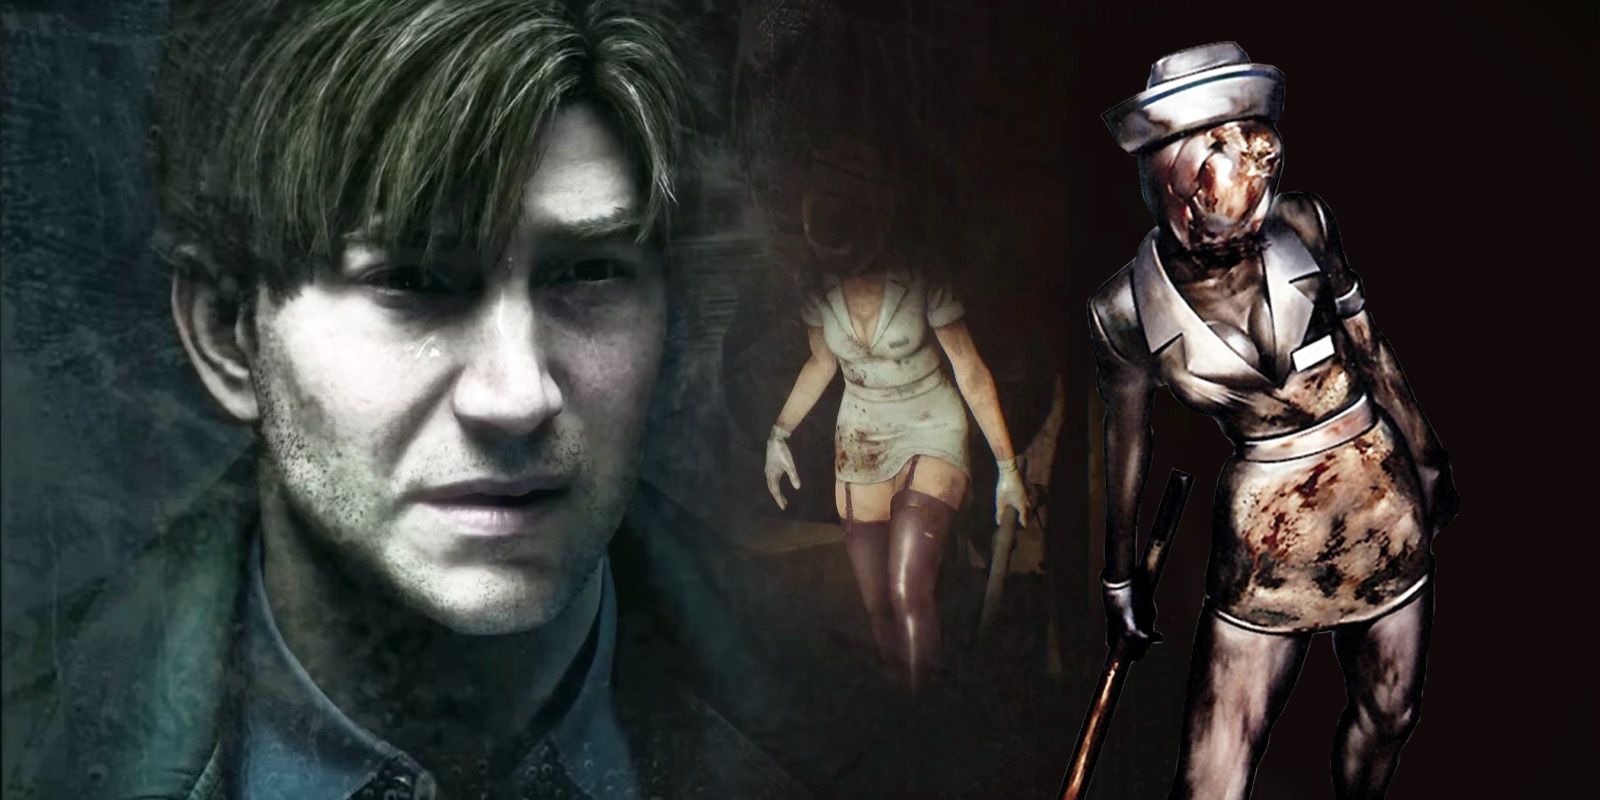 A sad-looking James Sunderland and two nurses in screenshots from the Silent Hill 2 Remake trailer.